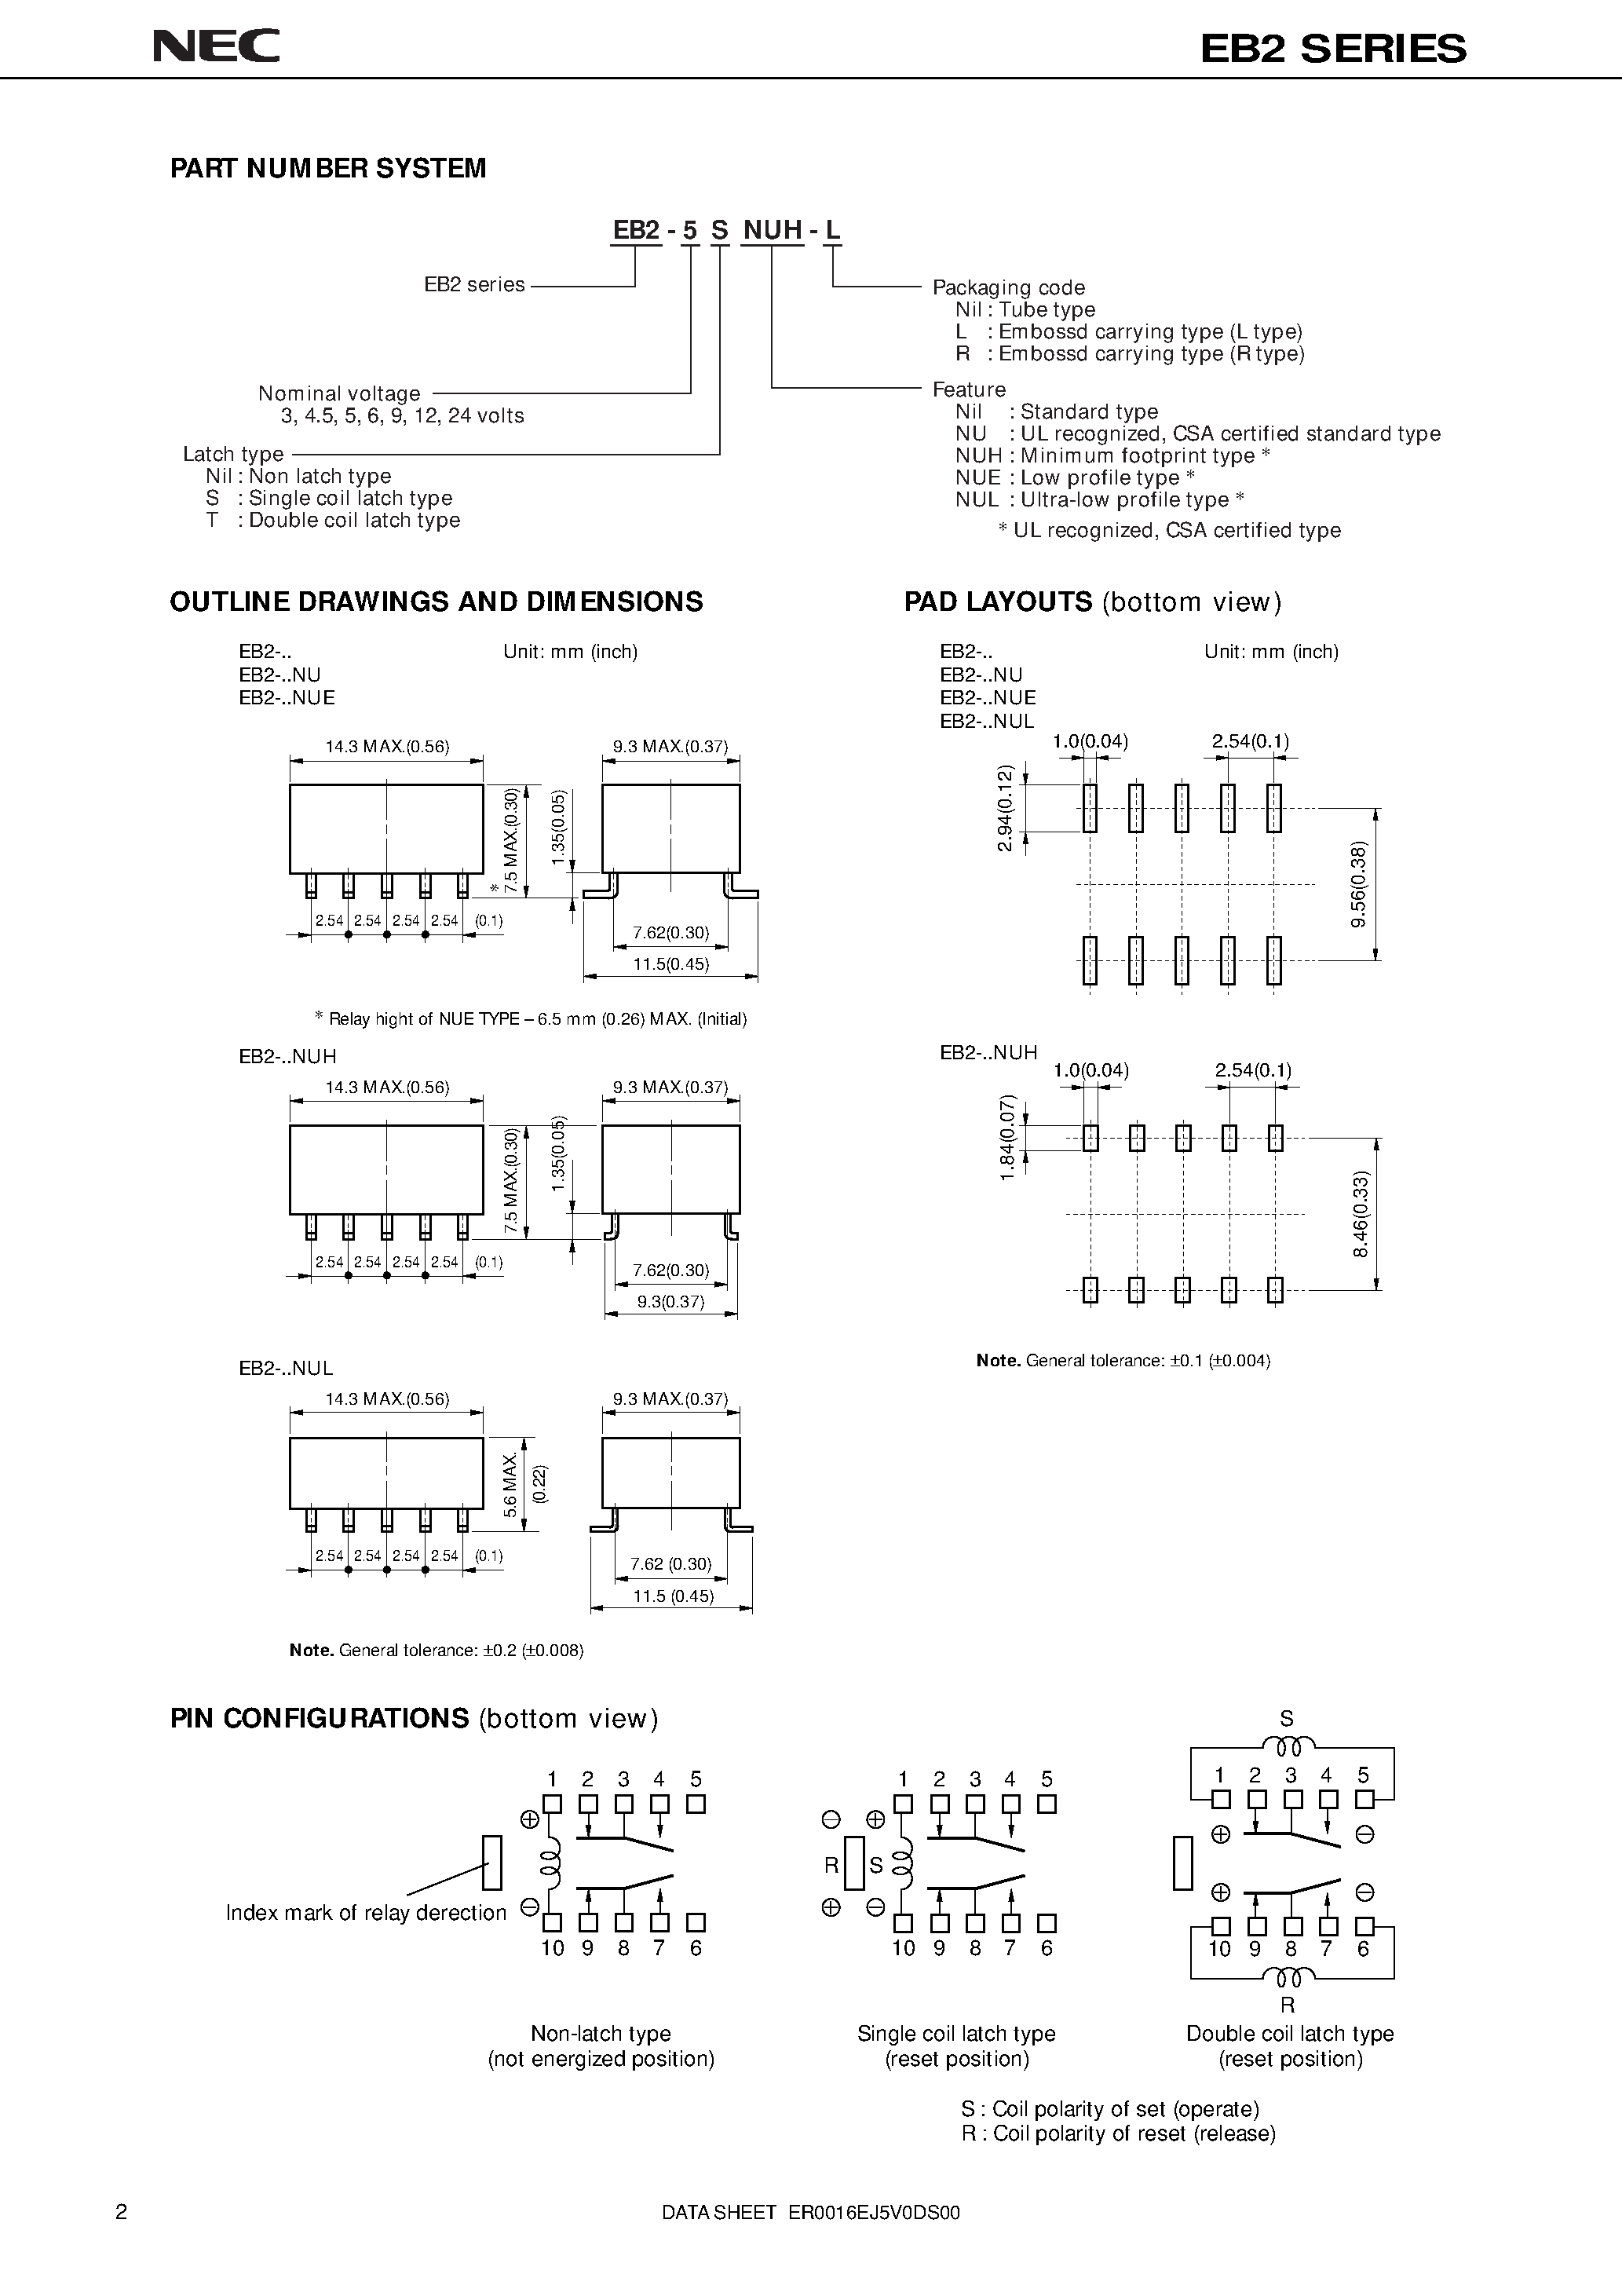 Datasheet EB2-9-L - COMPACT AND LIGHT WEIGHT SURFACE MOUNTING TYPE page 2